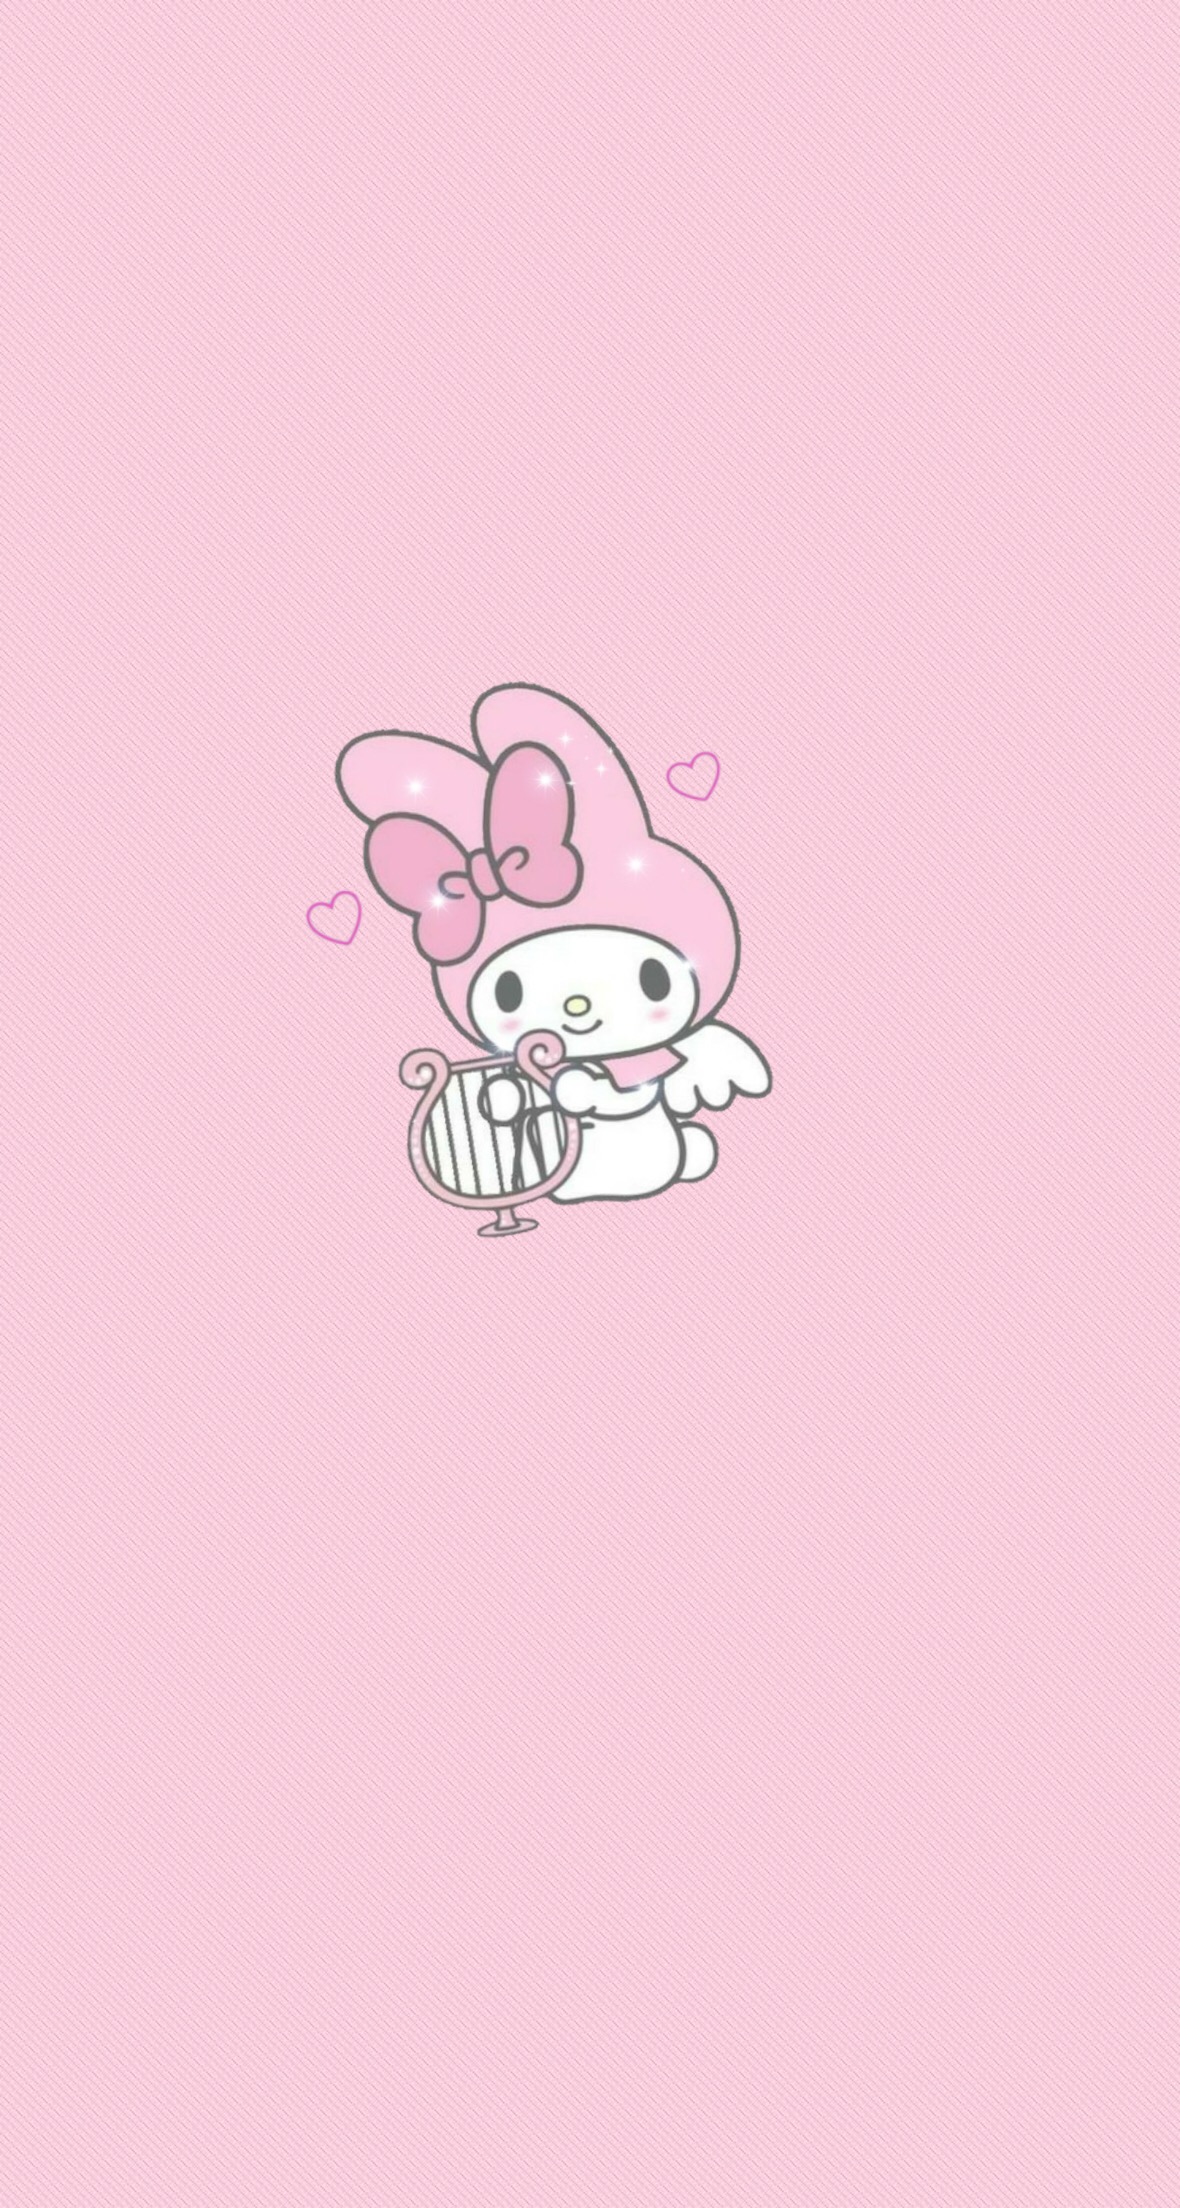 sanrio aesthetic mymelody melody pink image